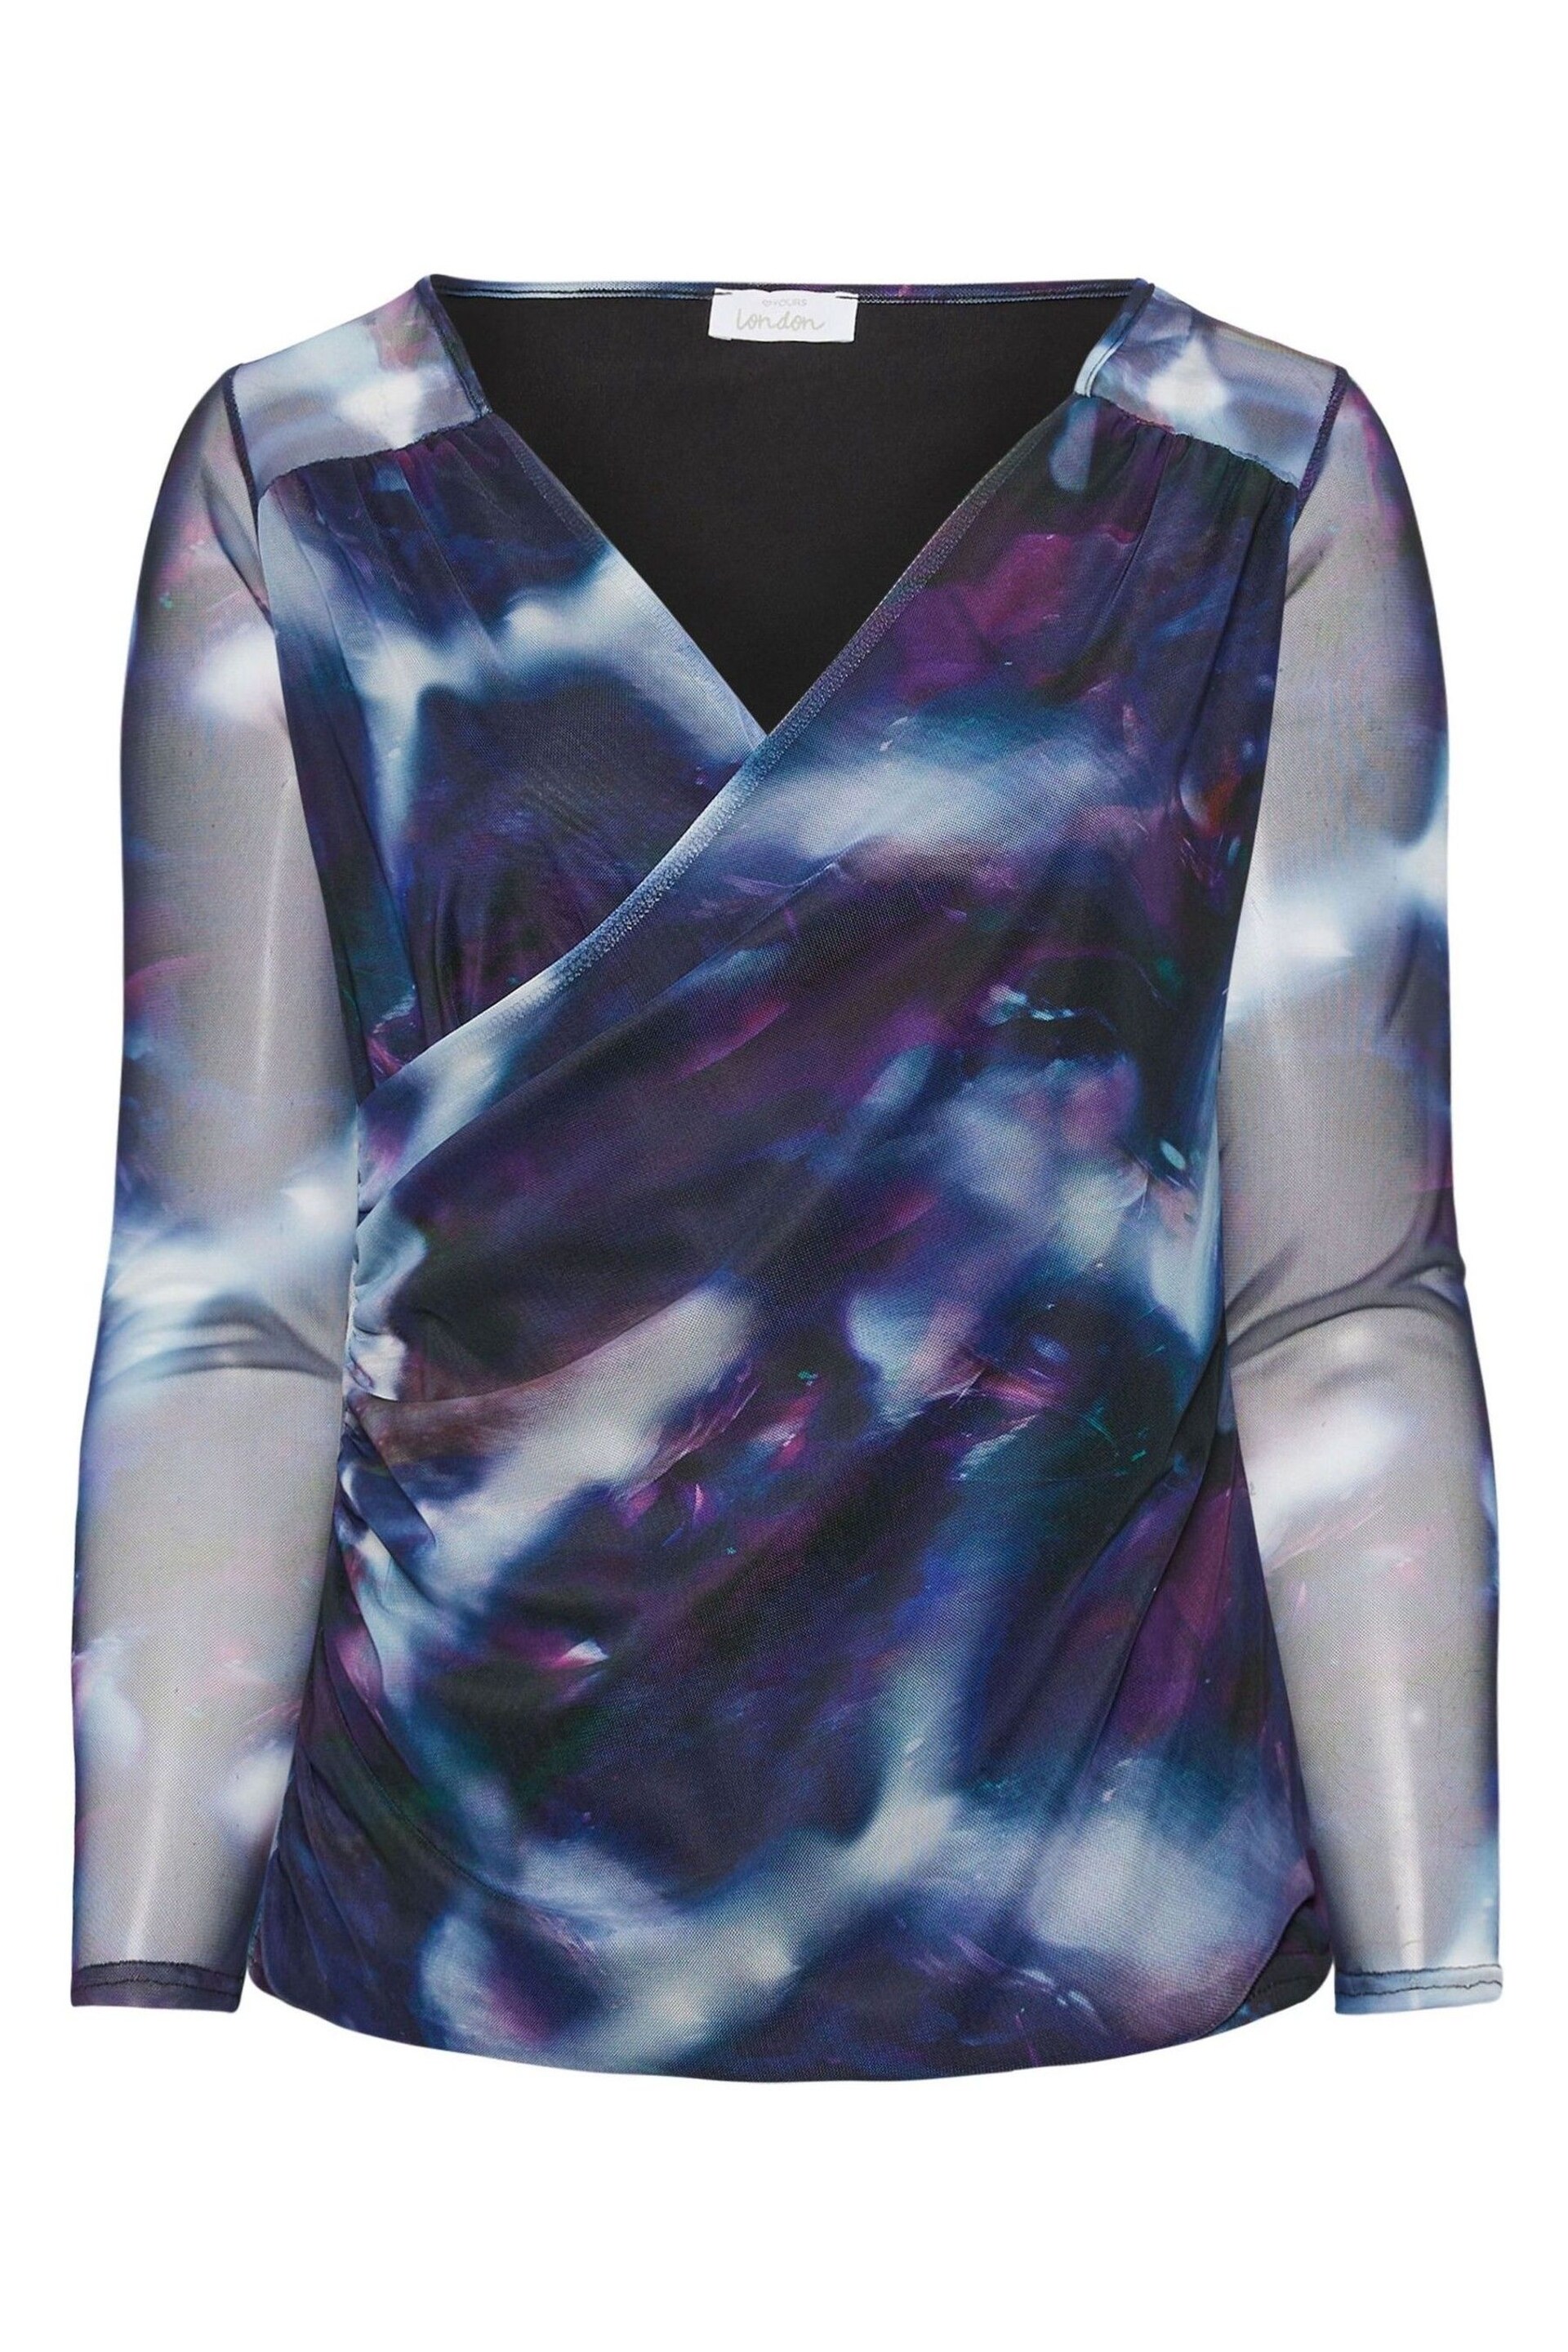 Yours Curve Purple London Mesh Abstract Print Top - Image 5 of 5